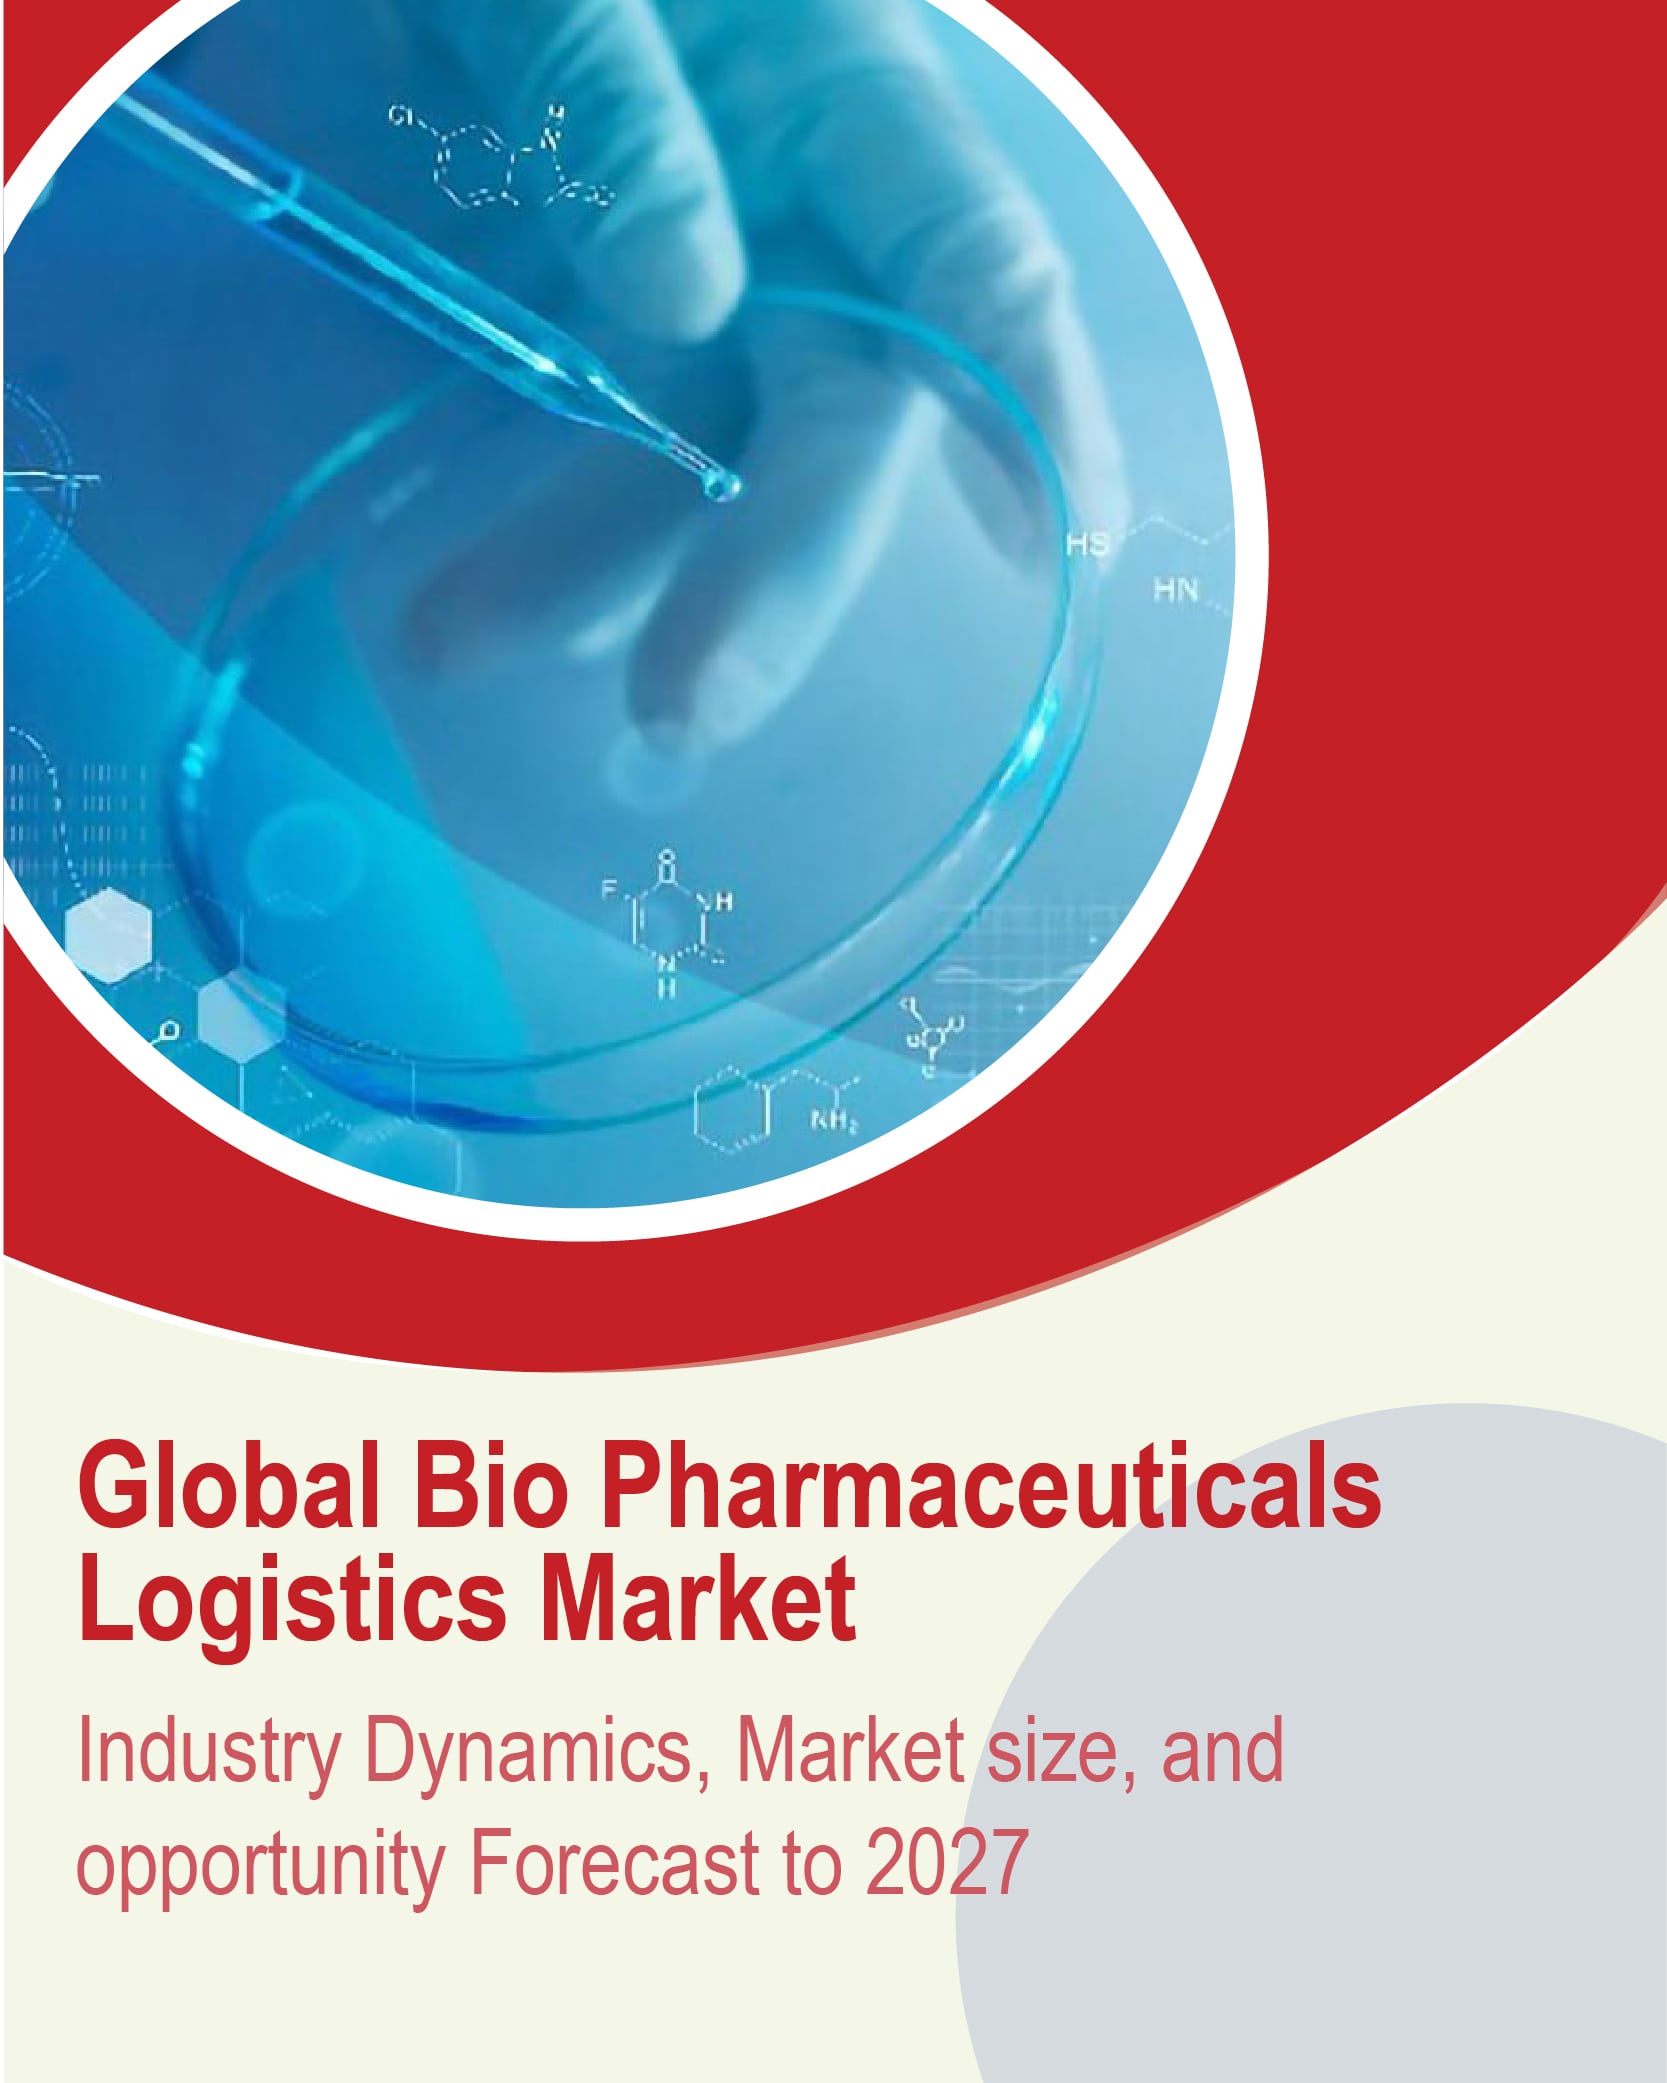 Bio Pharmaceutical Logistics Market - Industry Dynamics, Market Size, And Opportunity Forecast To 2027